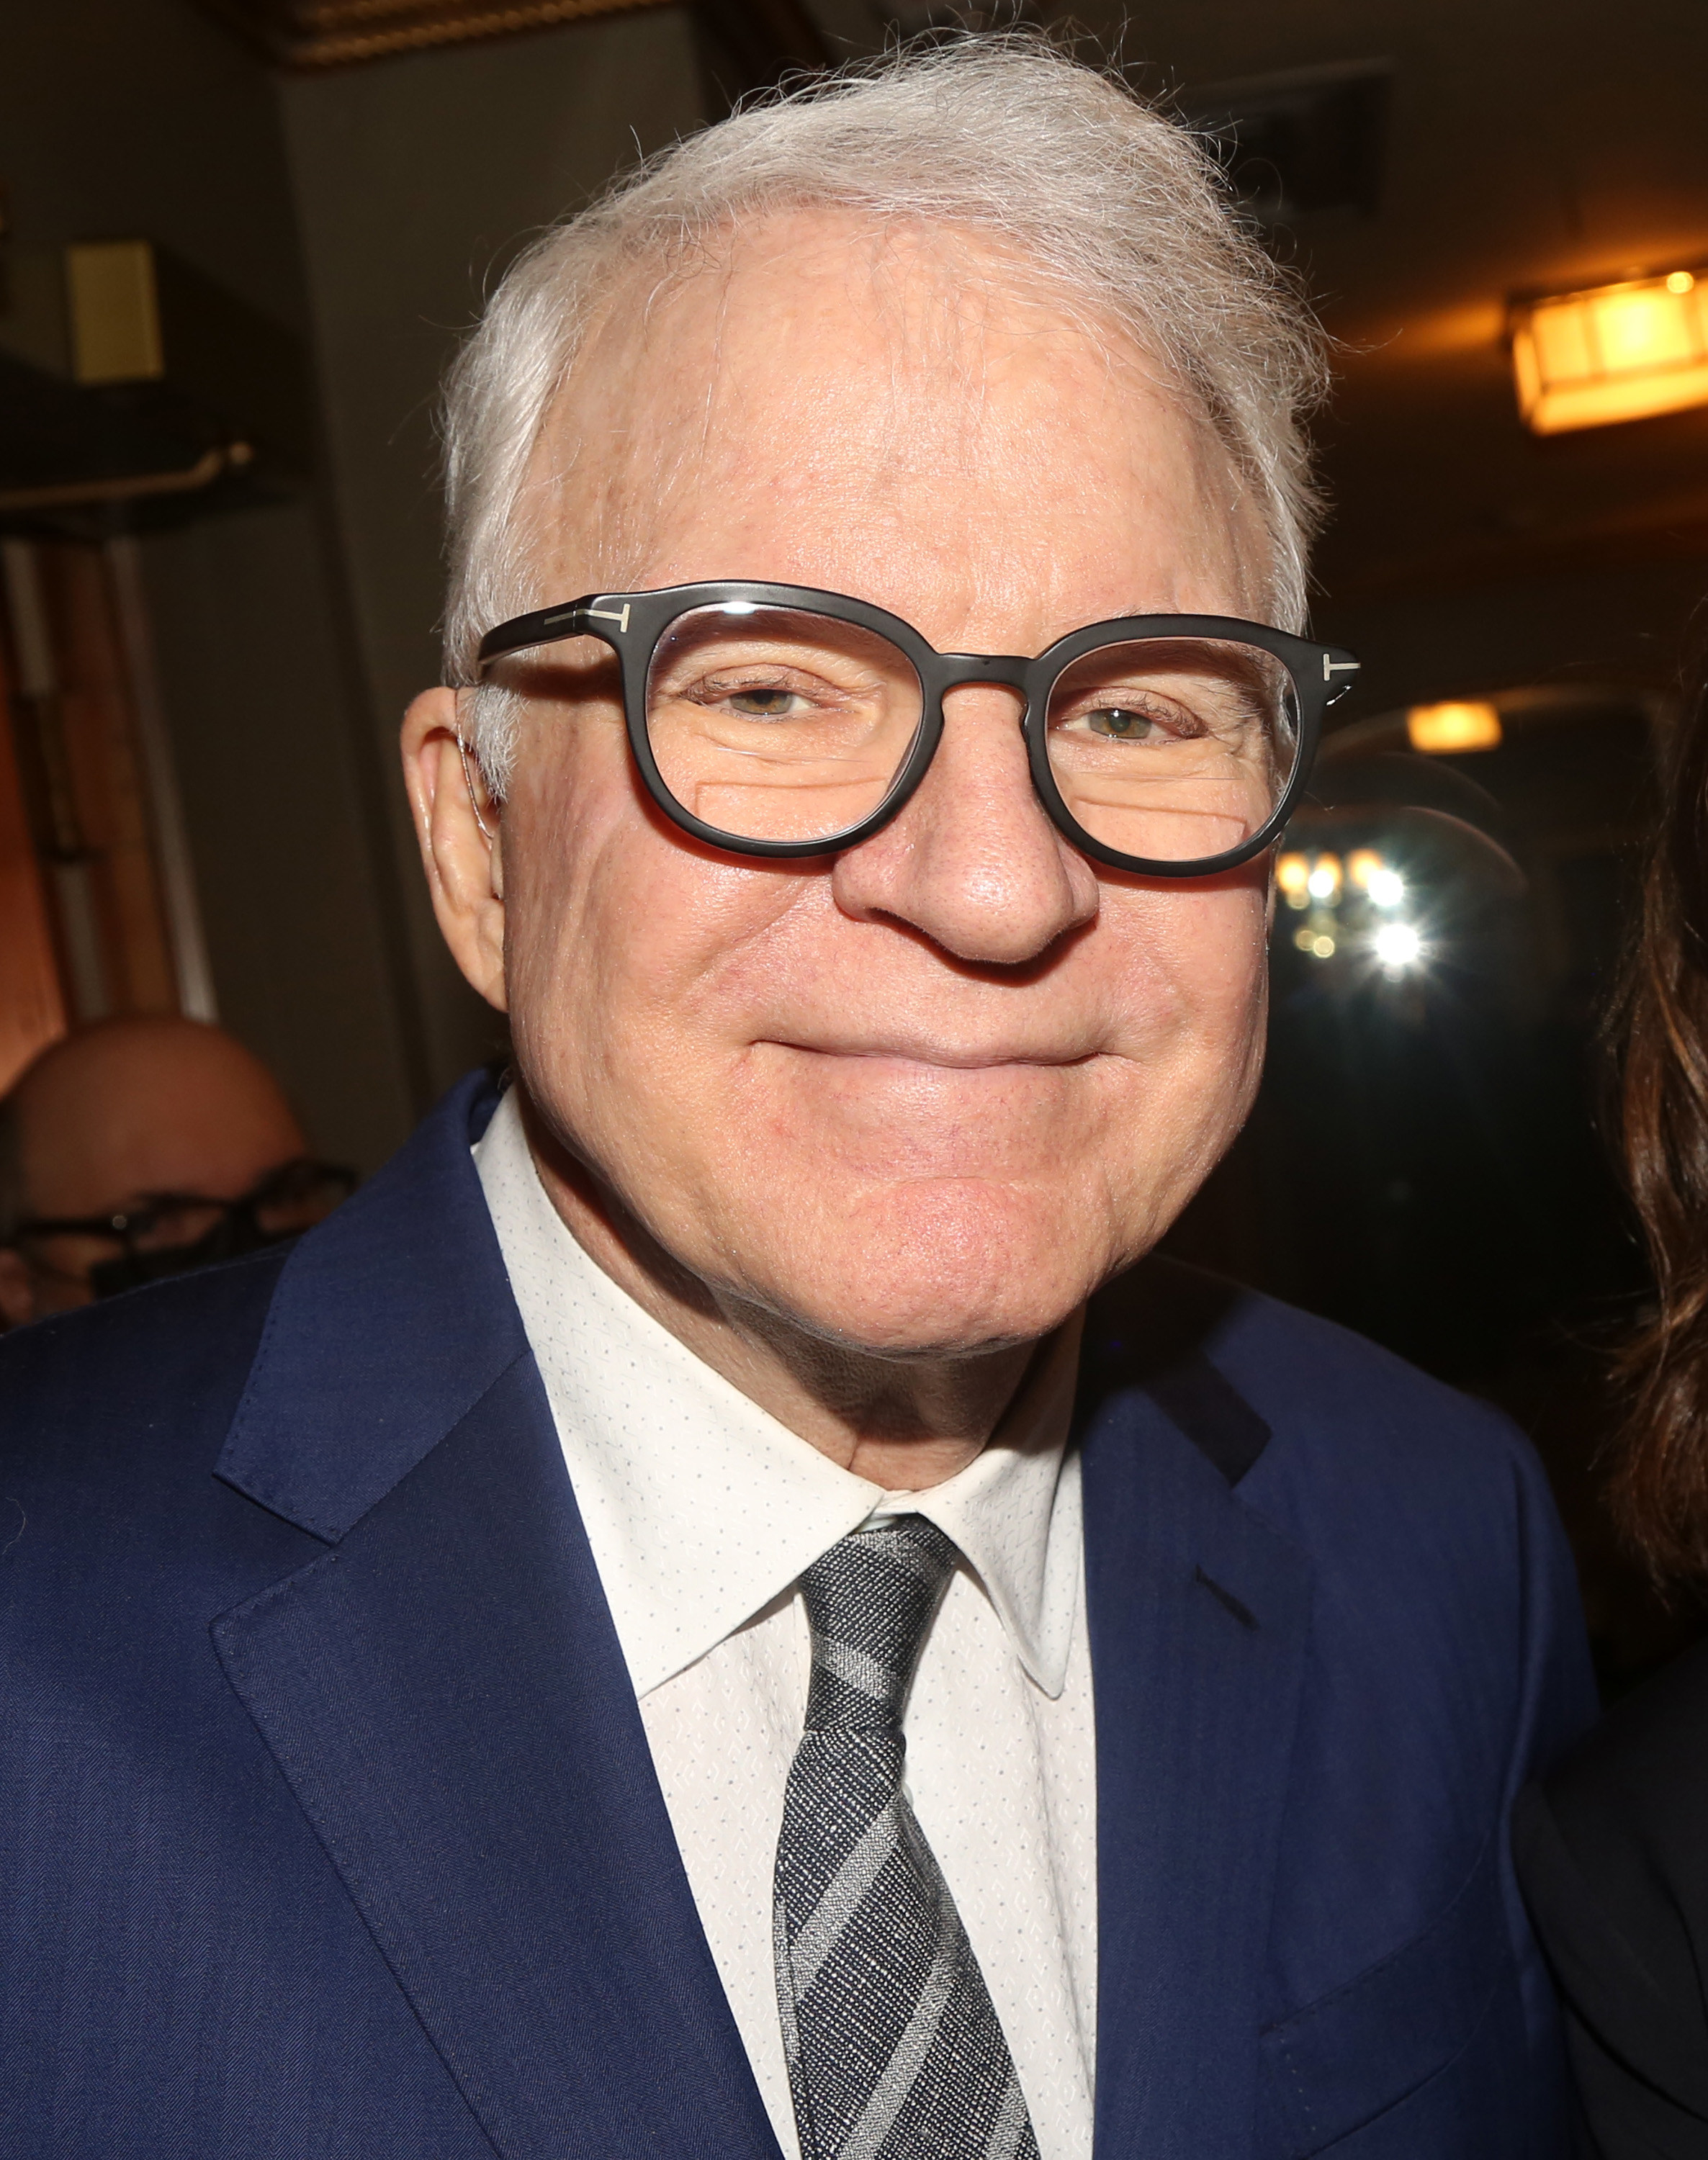 Steve Martin poses at the opening night of the new musical based on the 1992 film &quot;Mr. Saturday Night&quot; on Broadway at The Nederlander Theatre on April 27, 2022